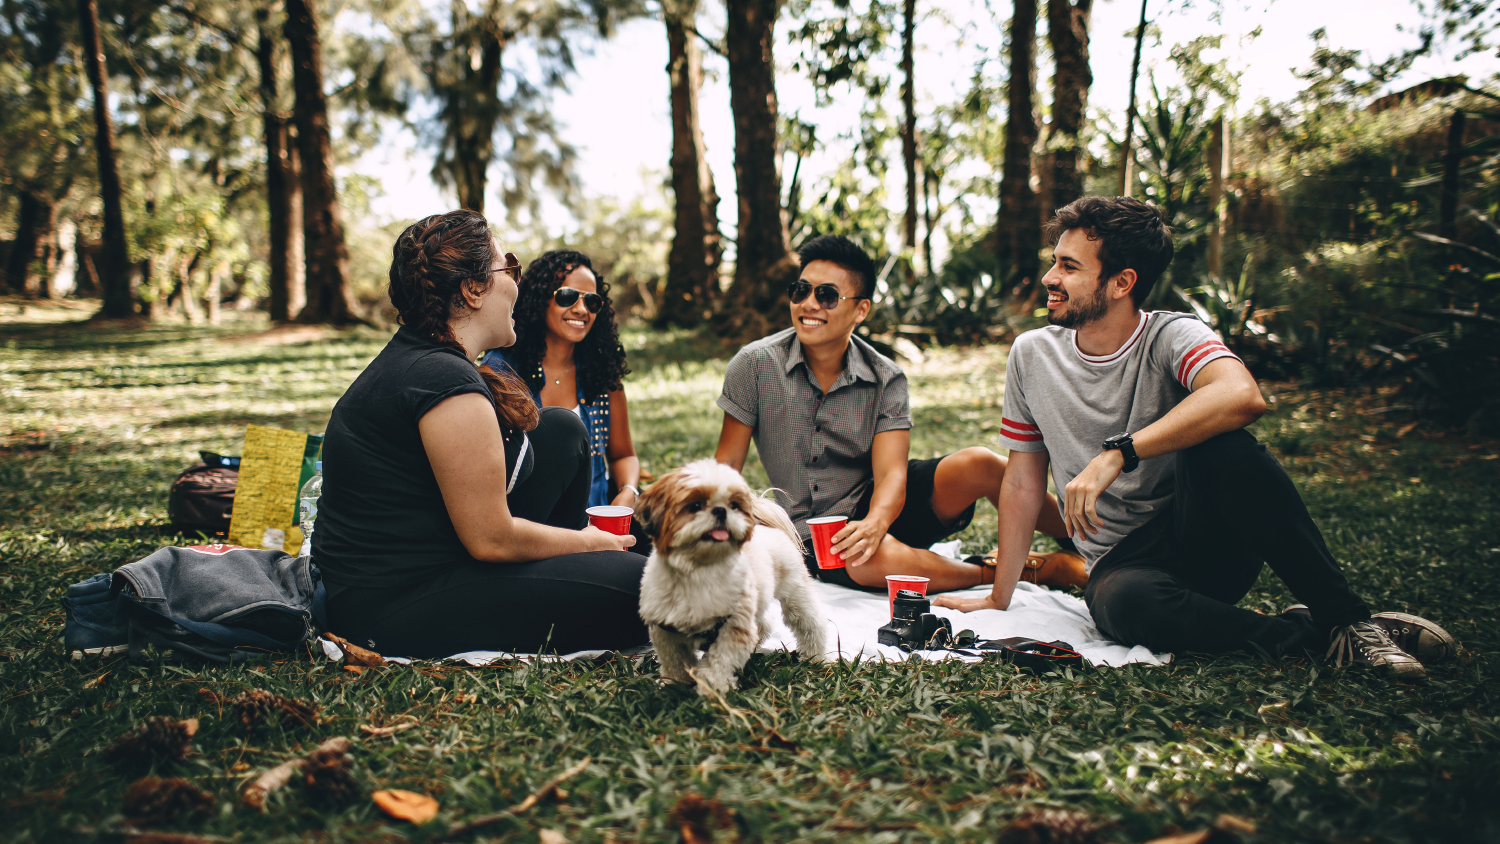 A group of young adults chats on a lawn